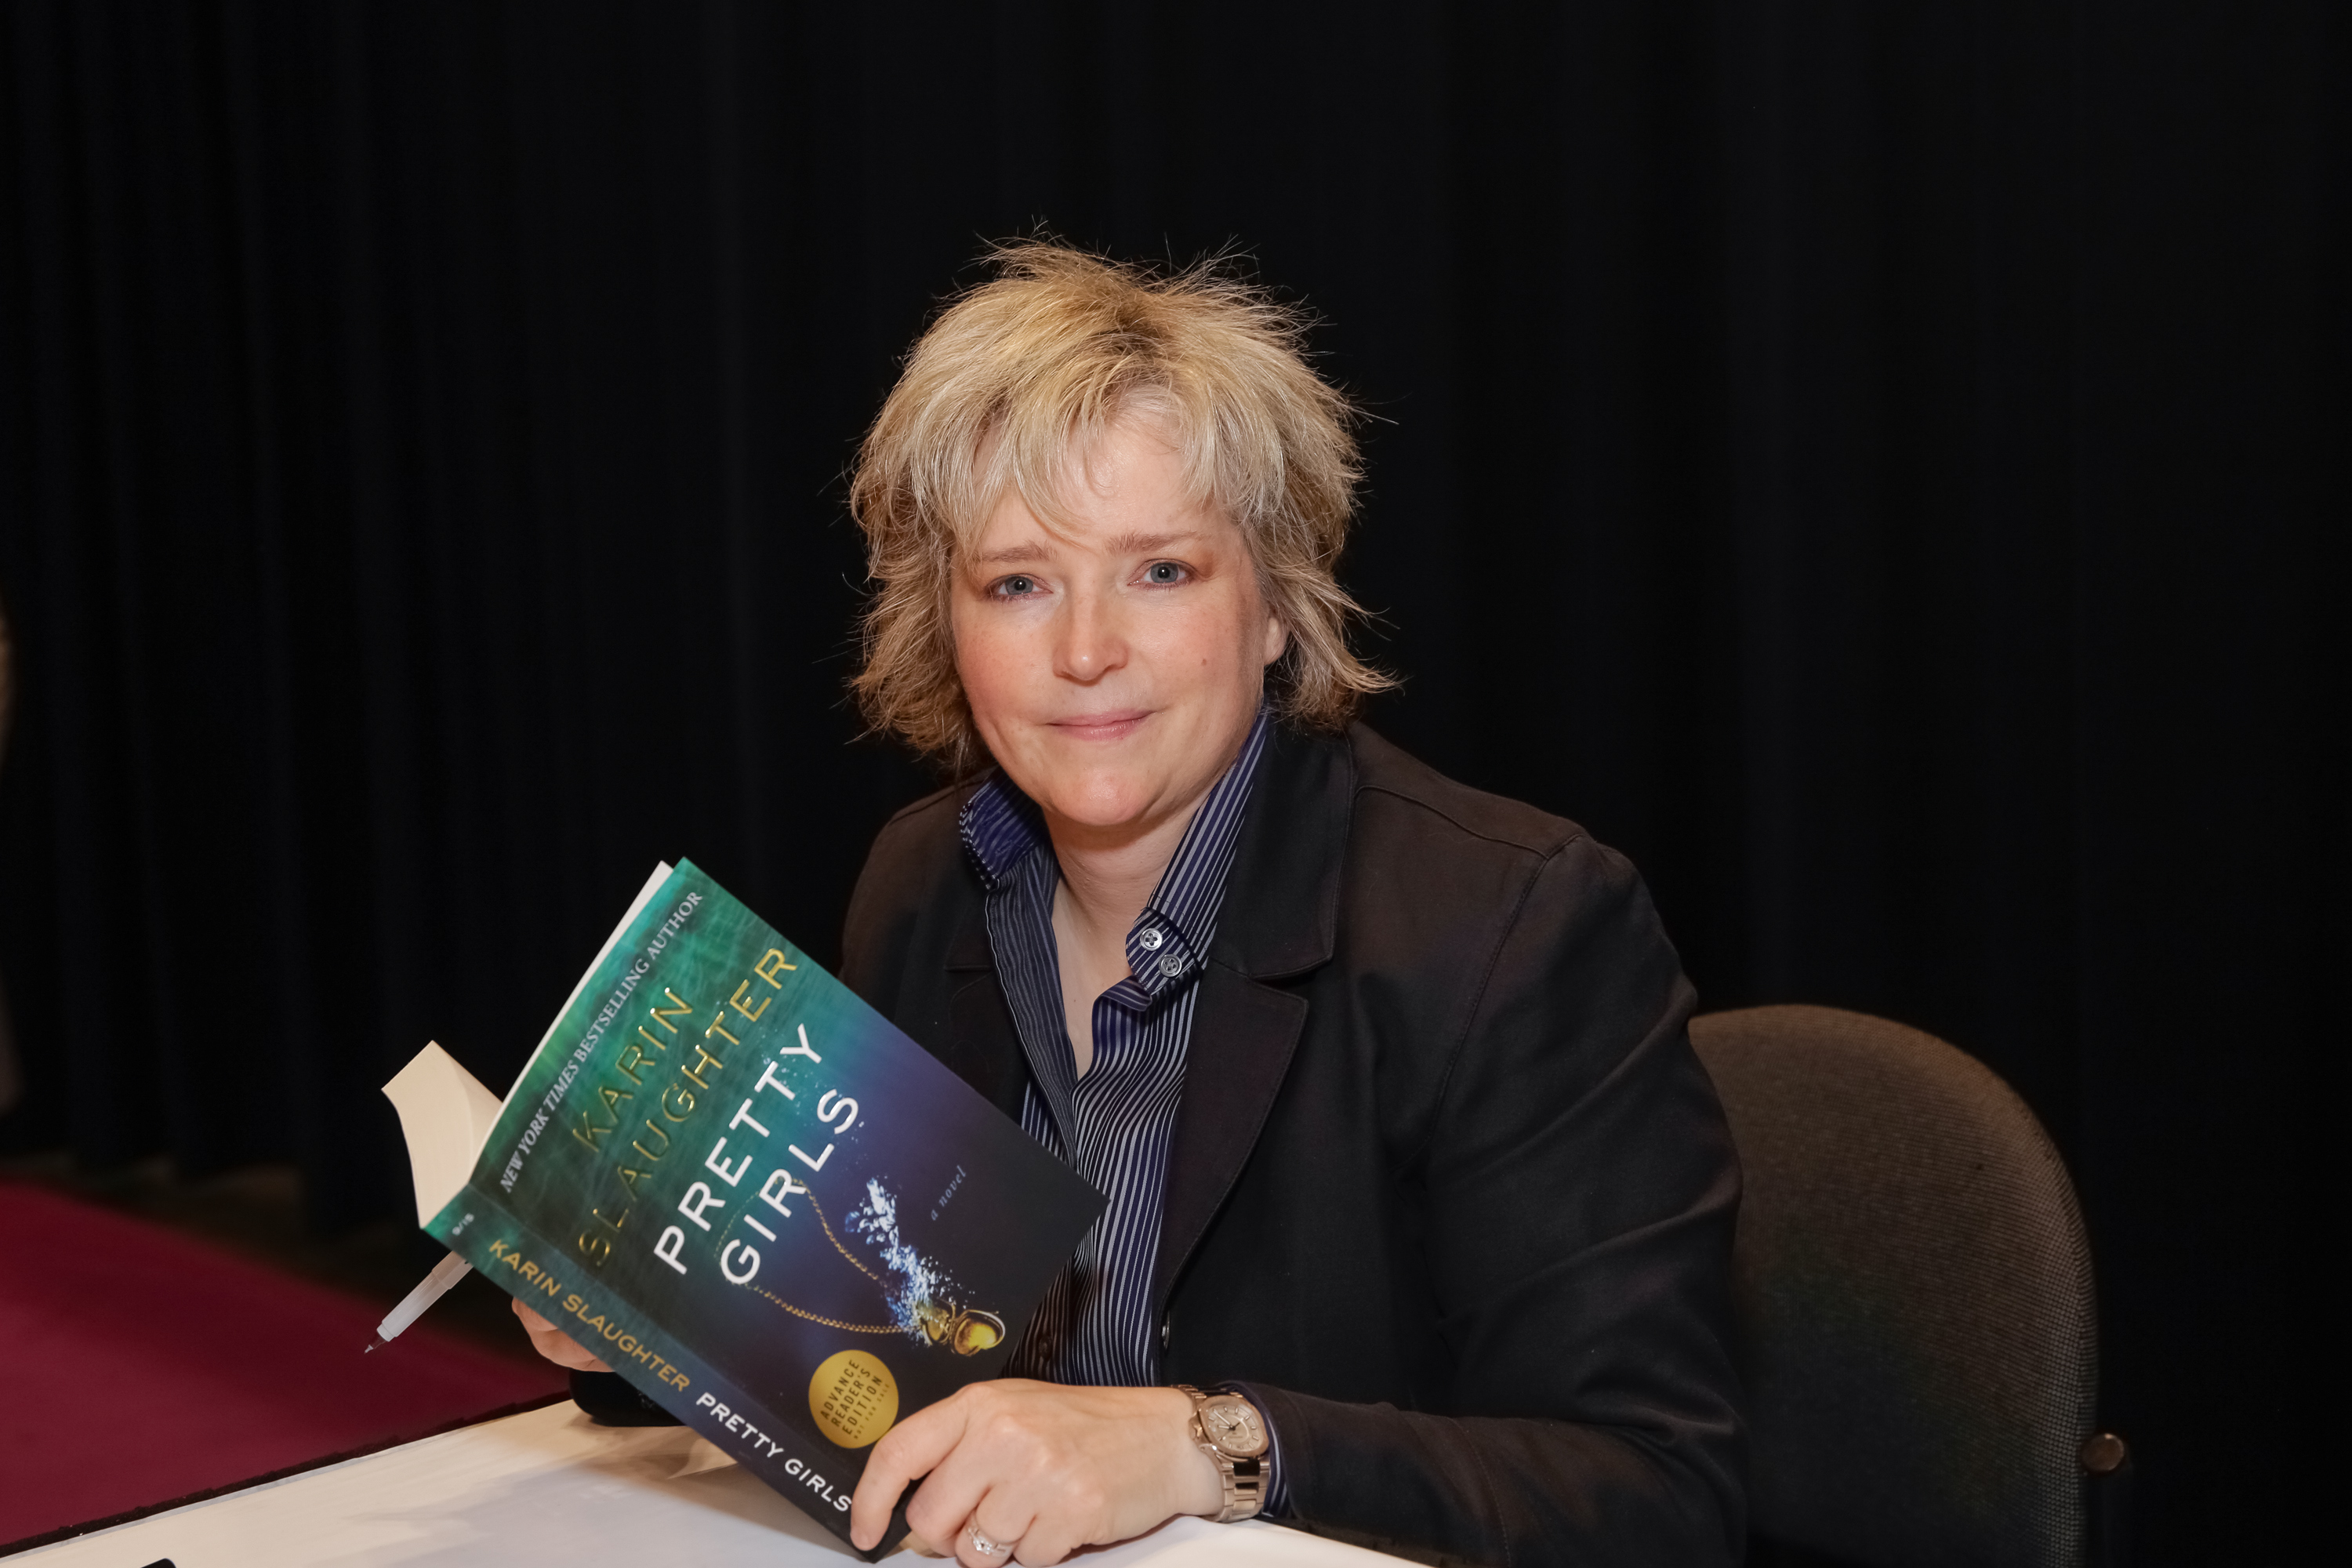 Author Karin Slaughter poses for photographs with her newest book during BookExpo America  in New York City on May 27, 2015.